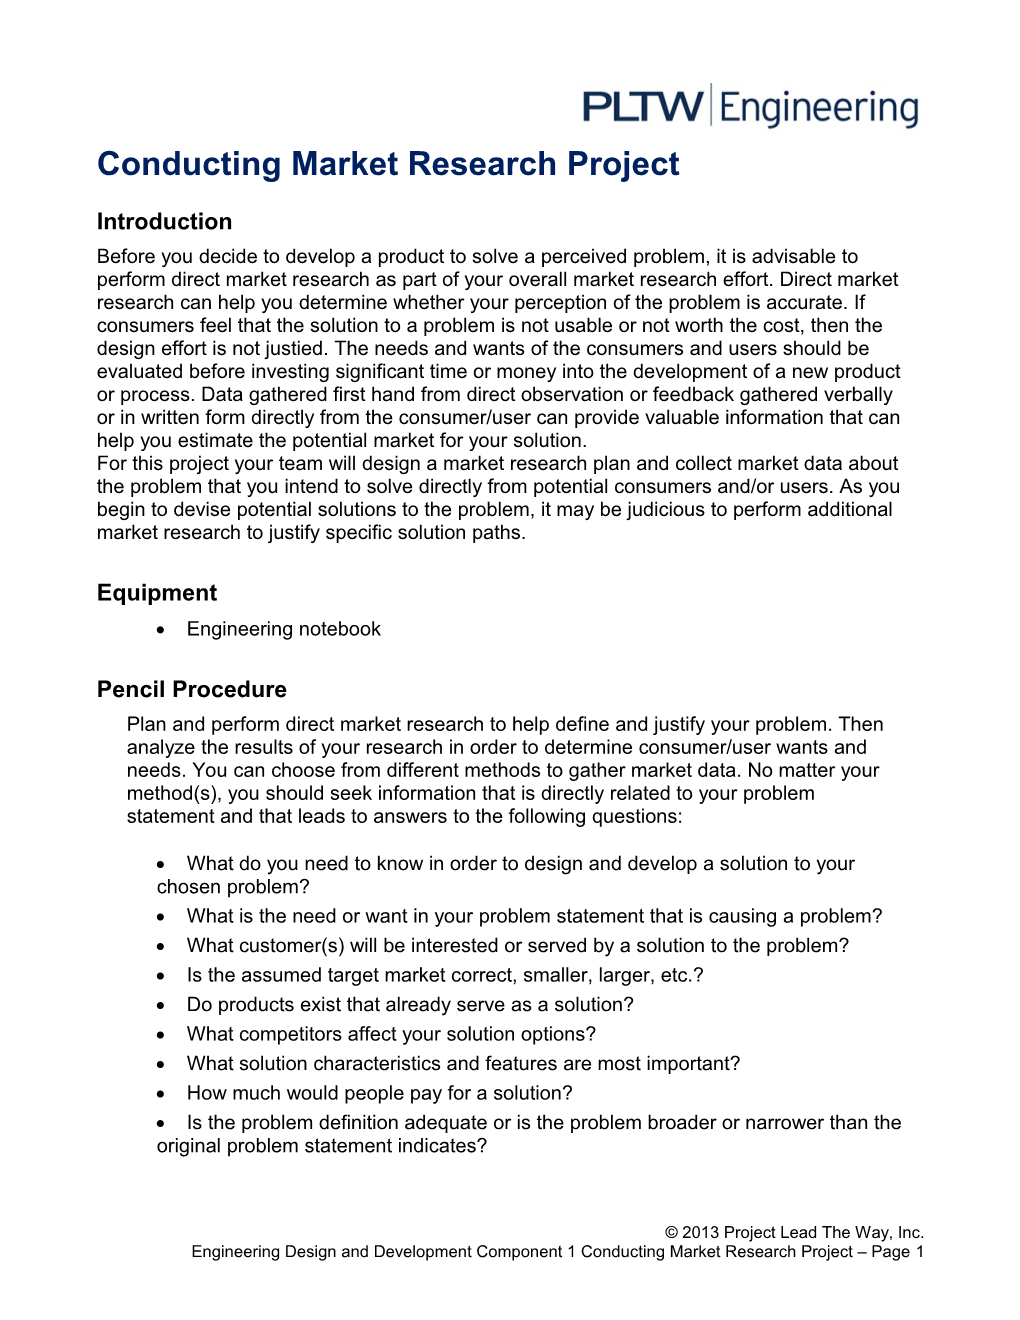 A4.4 Conducting Market Research